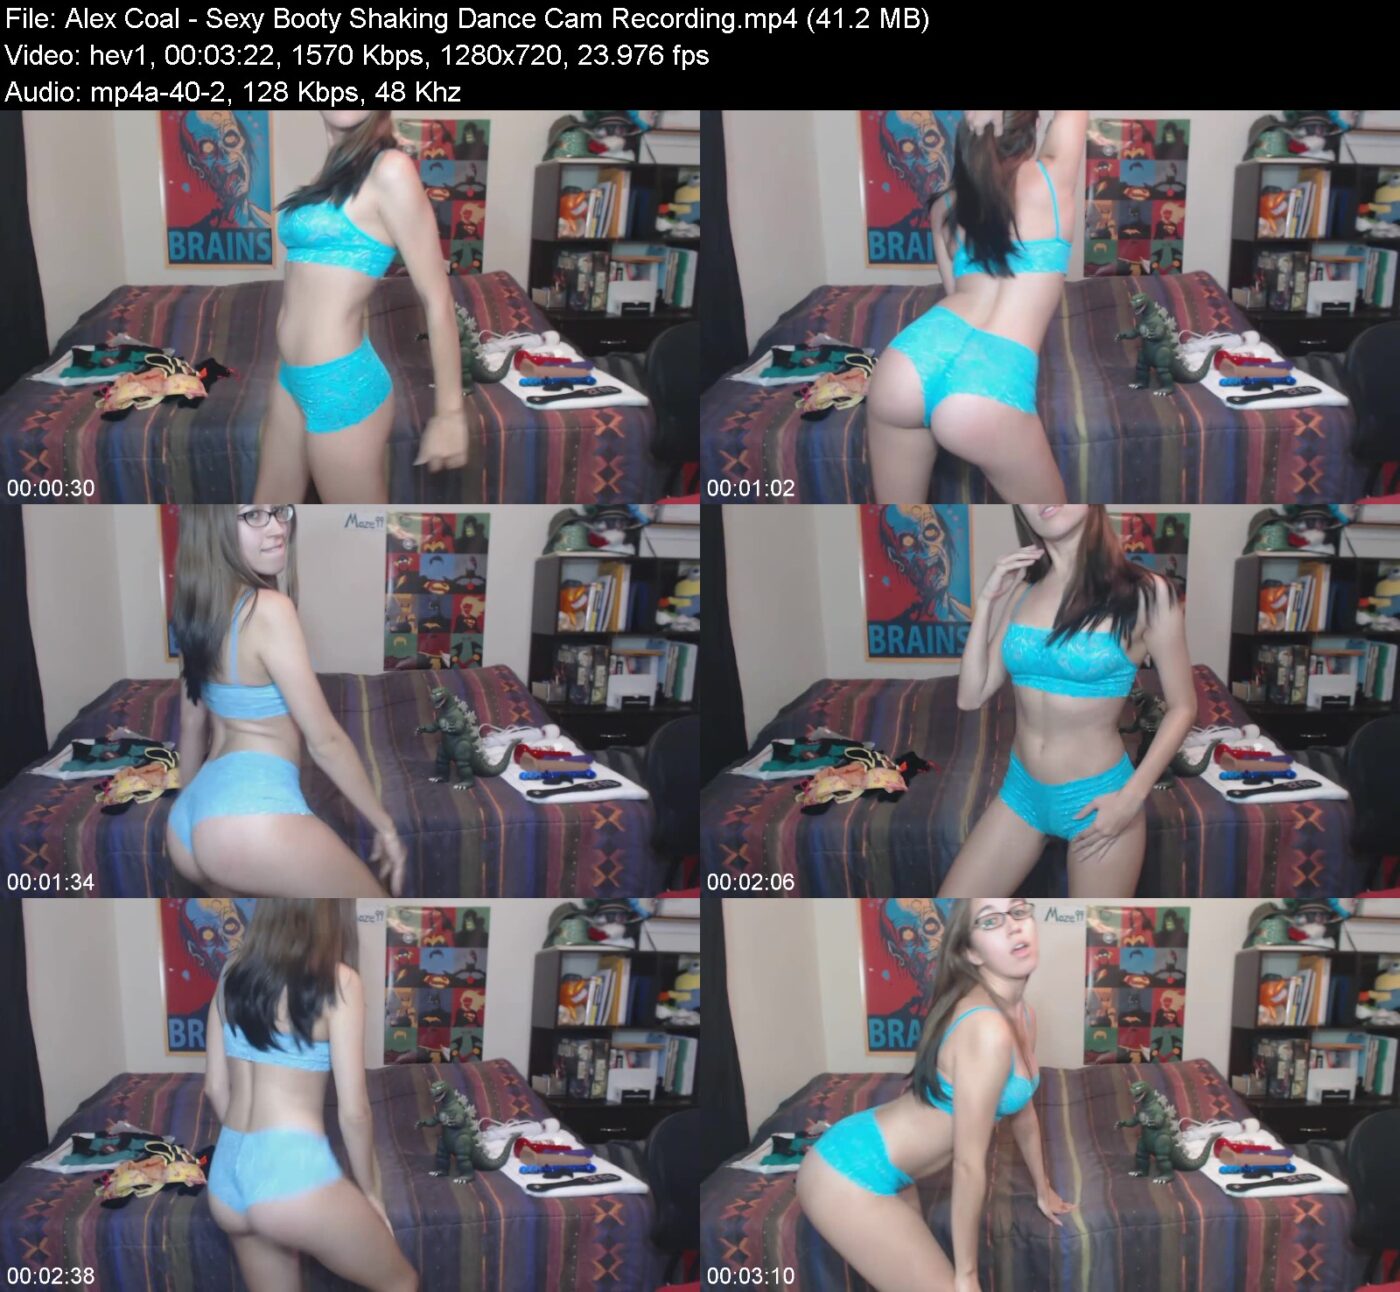 Alex Coal in Sexy Booty Shaking Dance Cam Recording